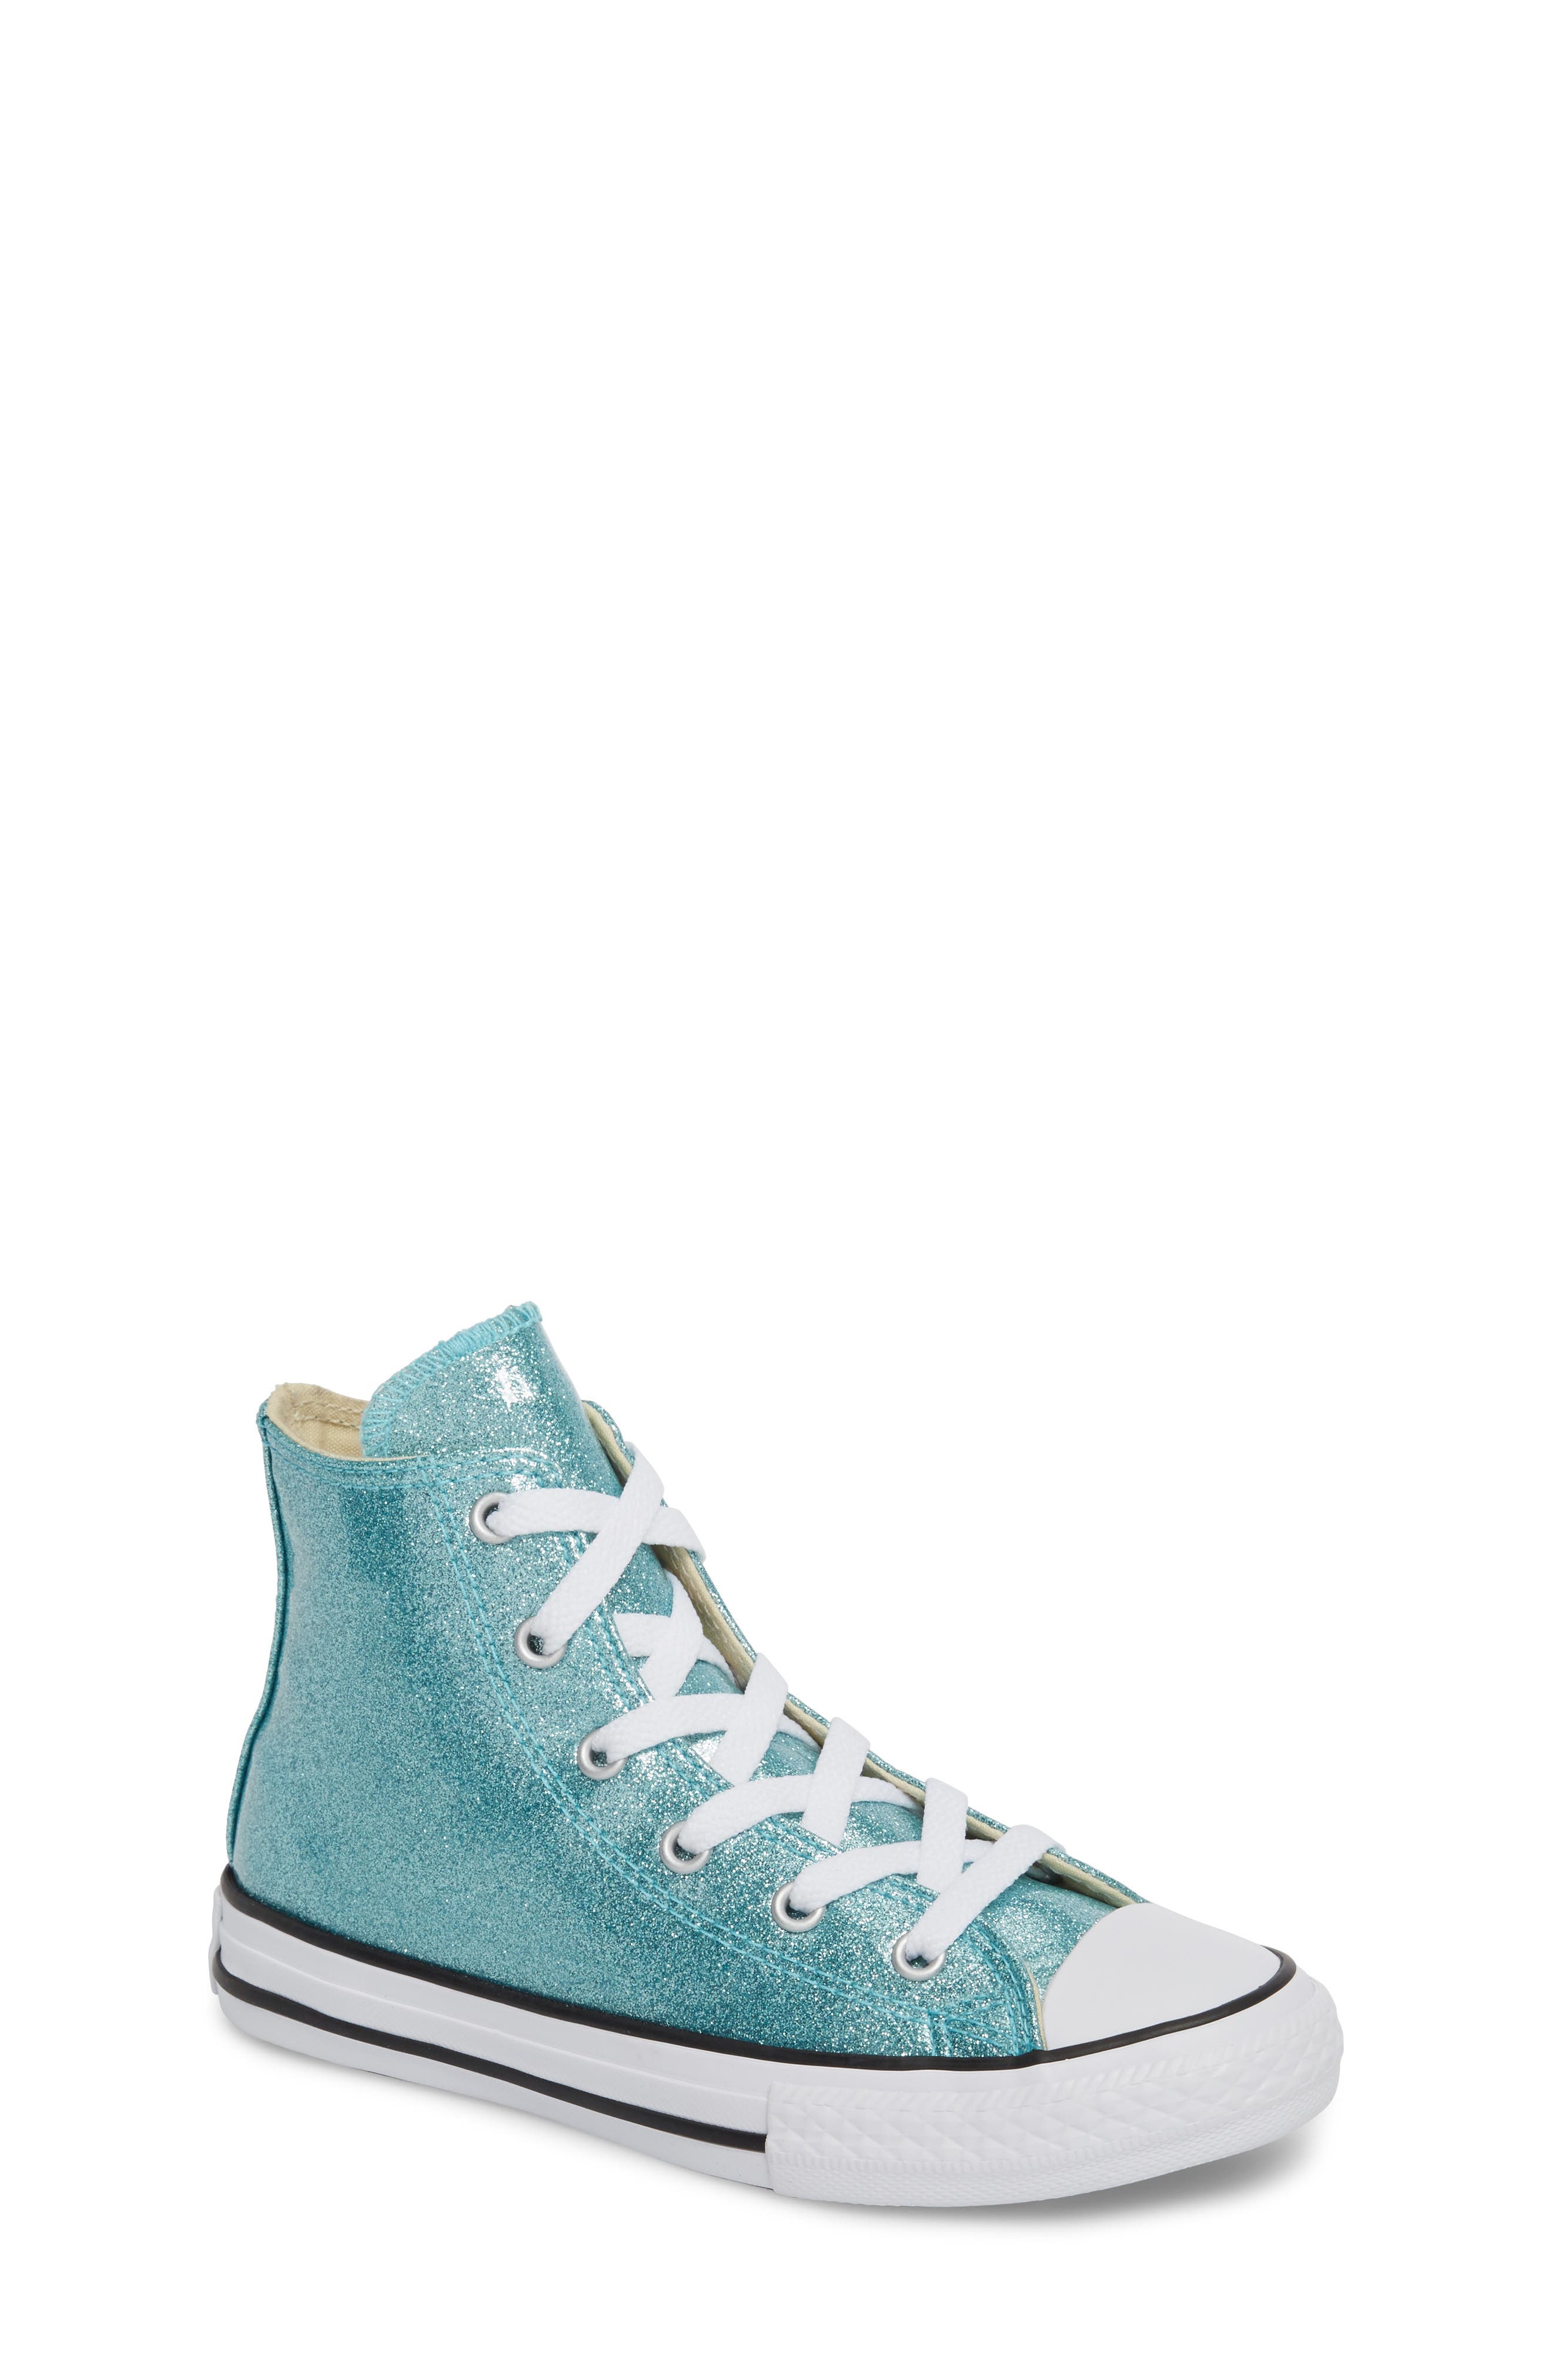 turquoise converse high tops kids